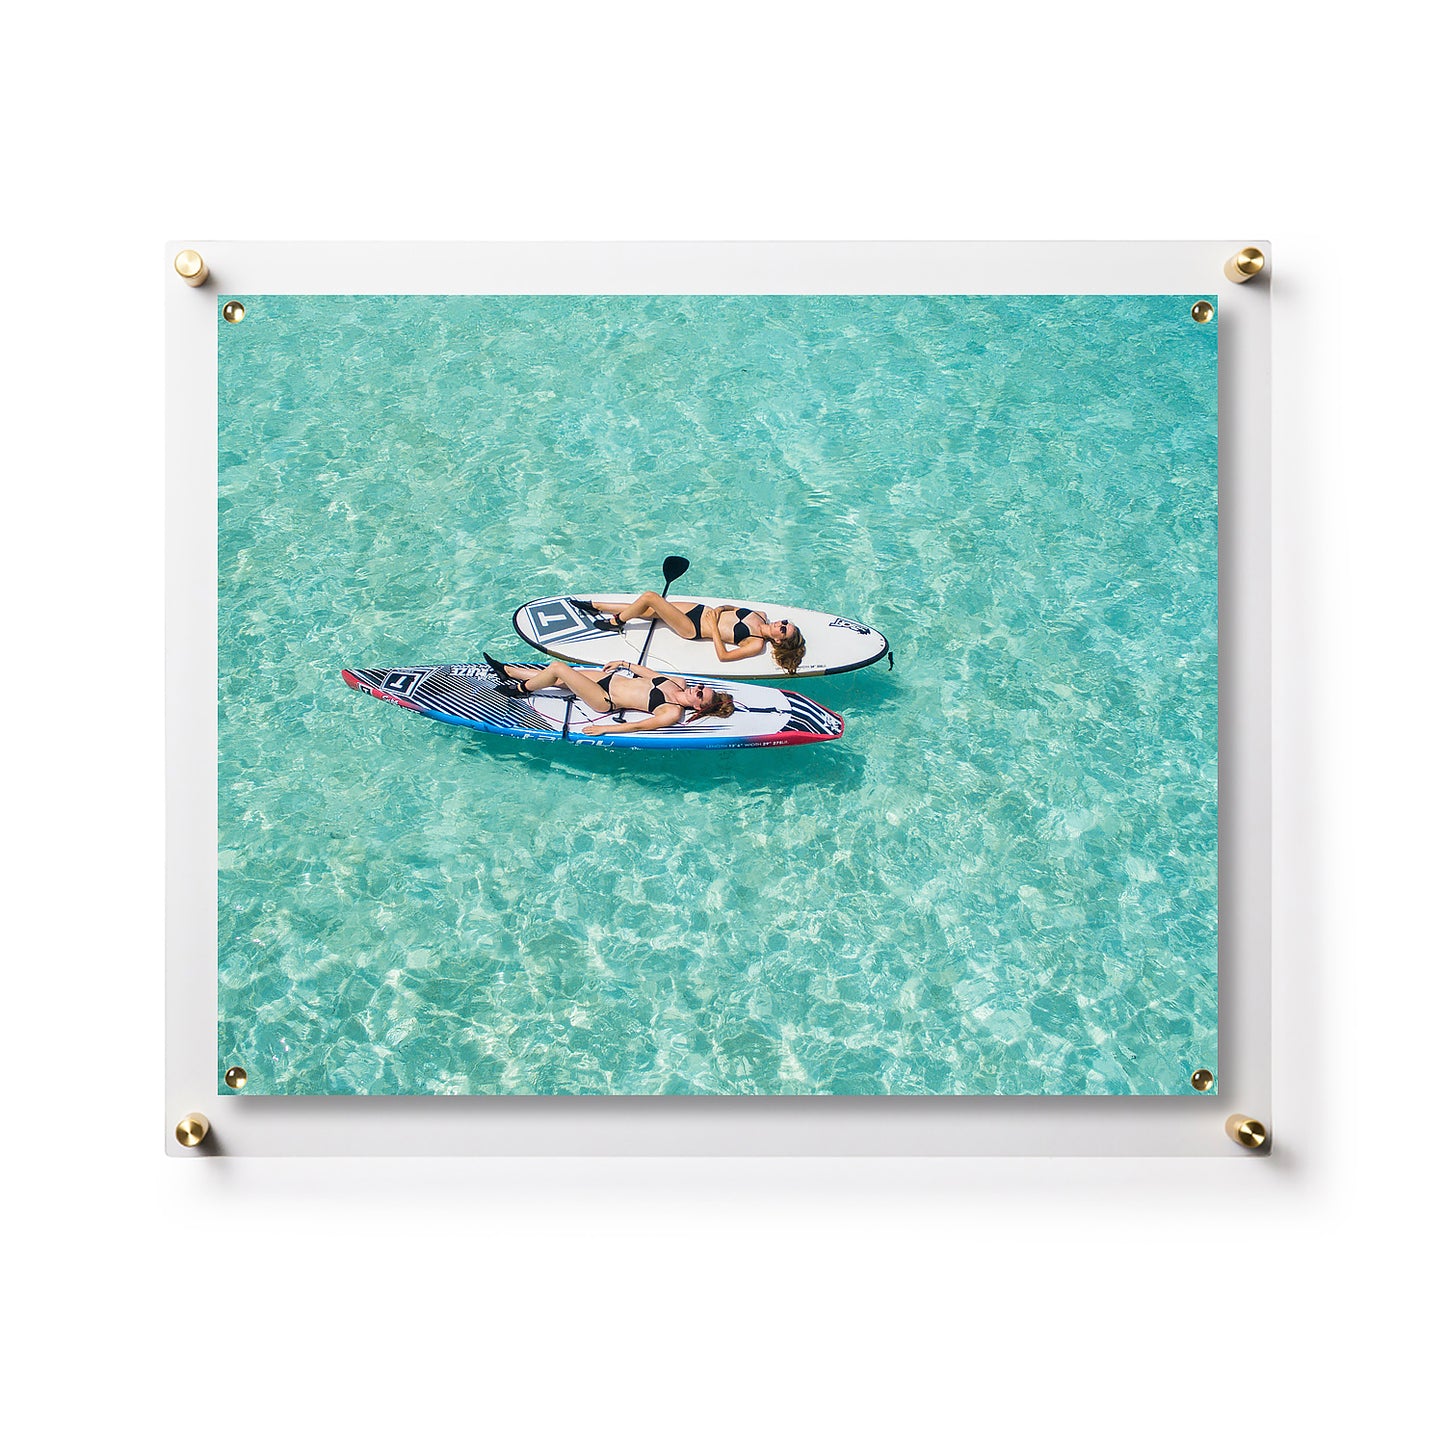 19" x 23" Easy Change Float Frame + Magnets for 16" x 20" Art [Silver or Gold]